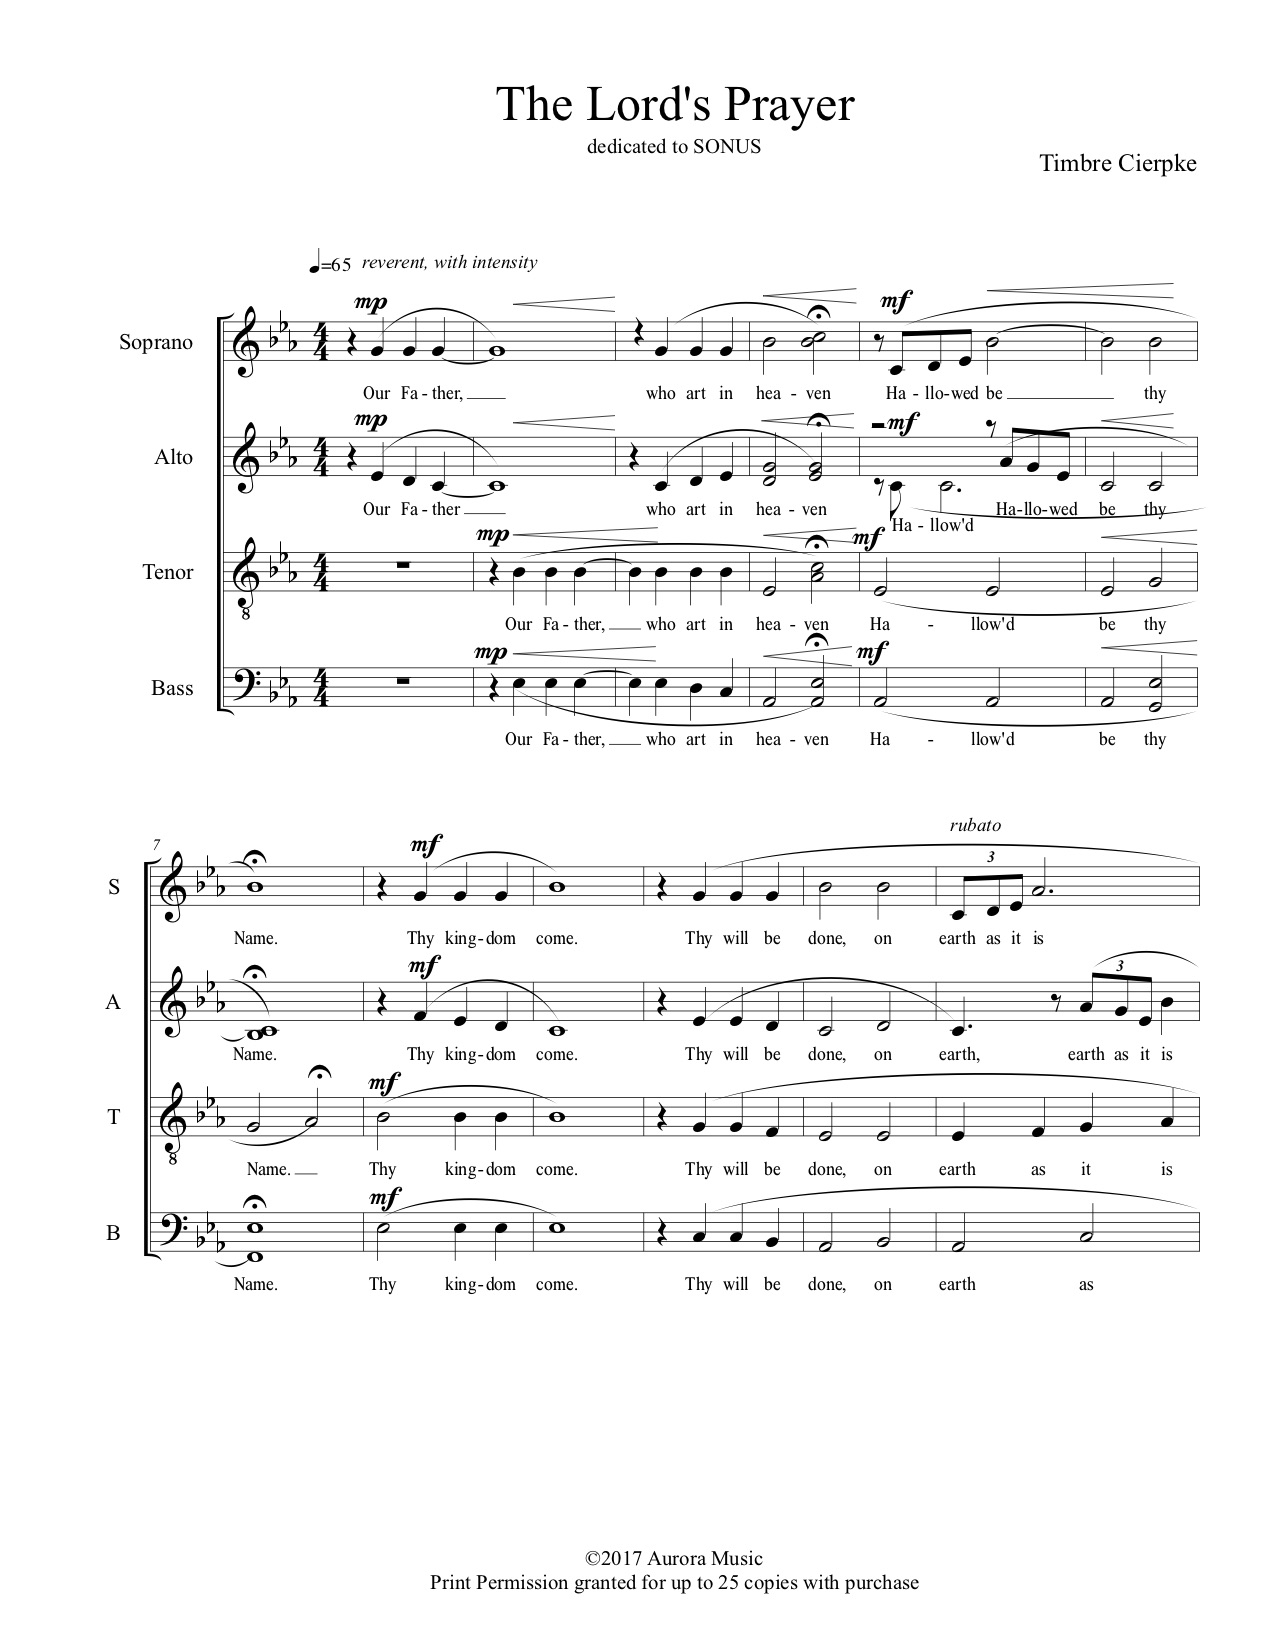 the-lord-s-prayer-pdf-score-up-to-25-prints-timbre-s-main-site